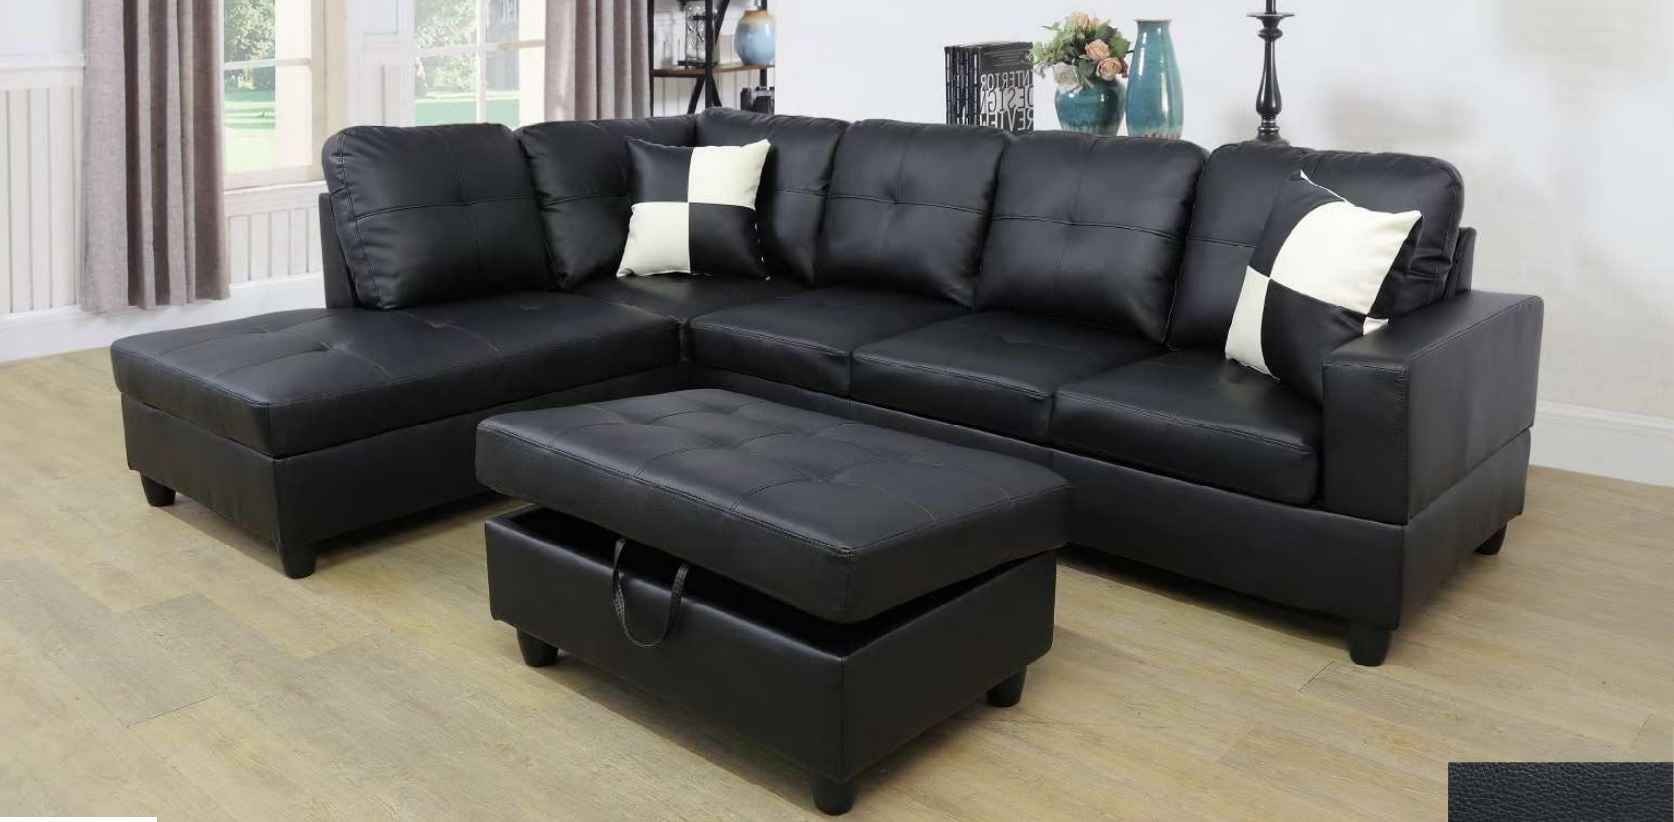 4pc Modern Black Leather Sectional Sofa Set S3289 for sale online 